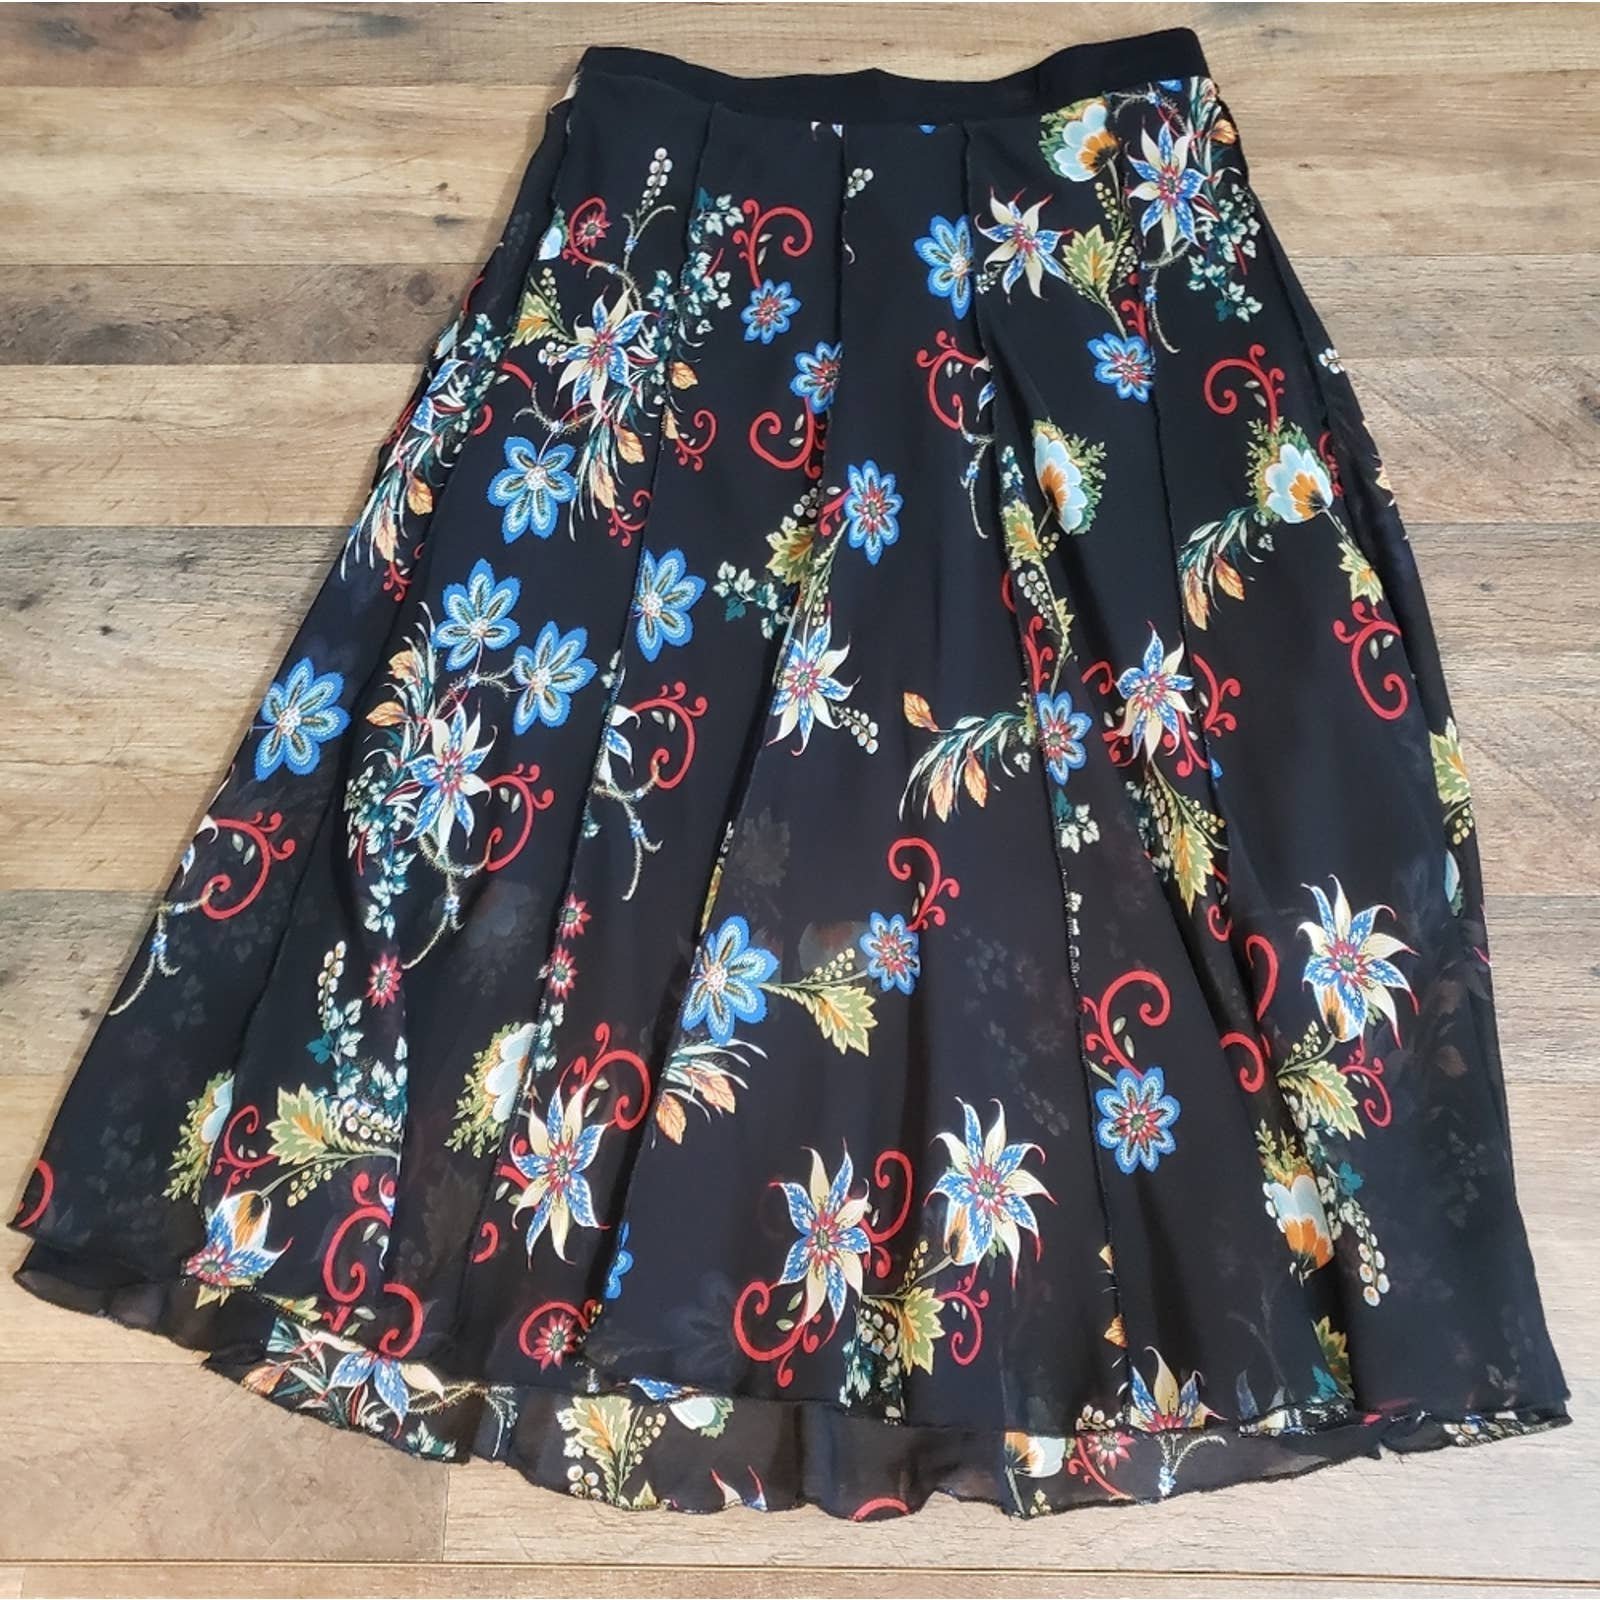 Great Lapis Floral Pleated Ruffle Midi Sheer Lined Exposed Seaming A-Line Skirt Large ISTRKYQKj well sale